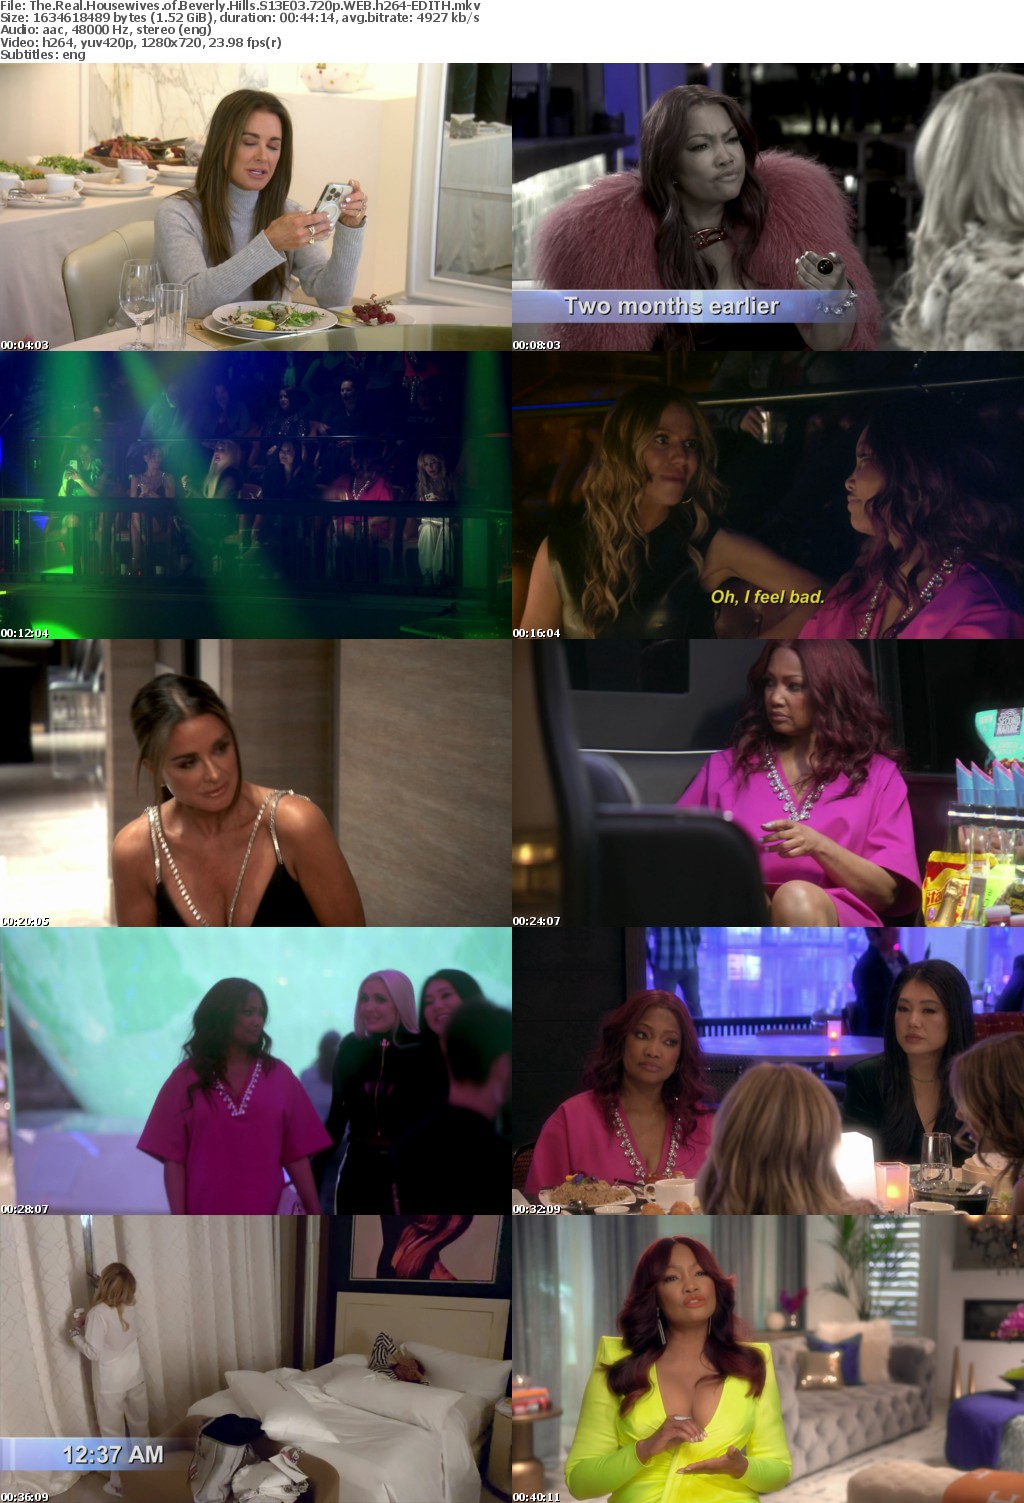 The Real Housewives of Beverly Hills S13E03 720p WEB h264-EDITH